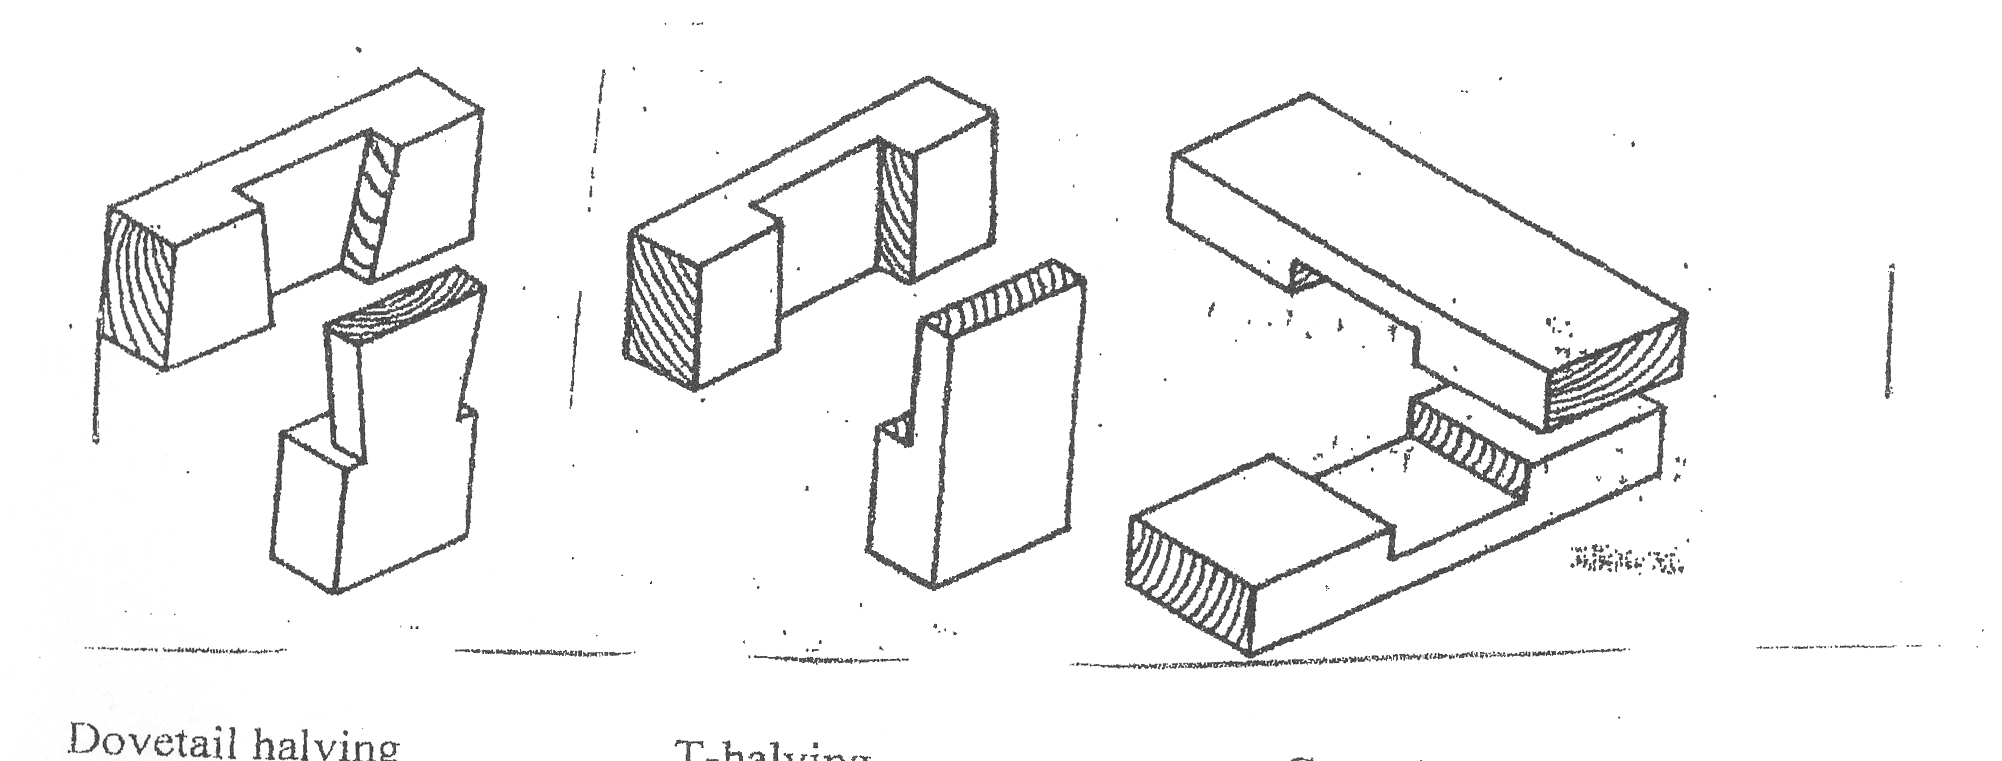 dovetails mortise and tenons sliding dovetails finger joints and many